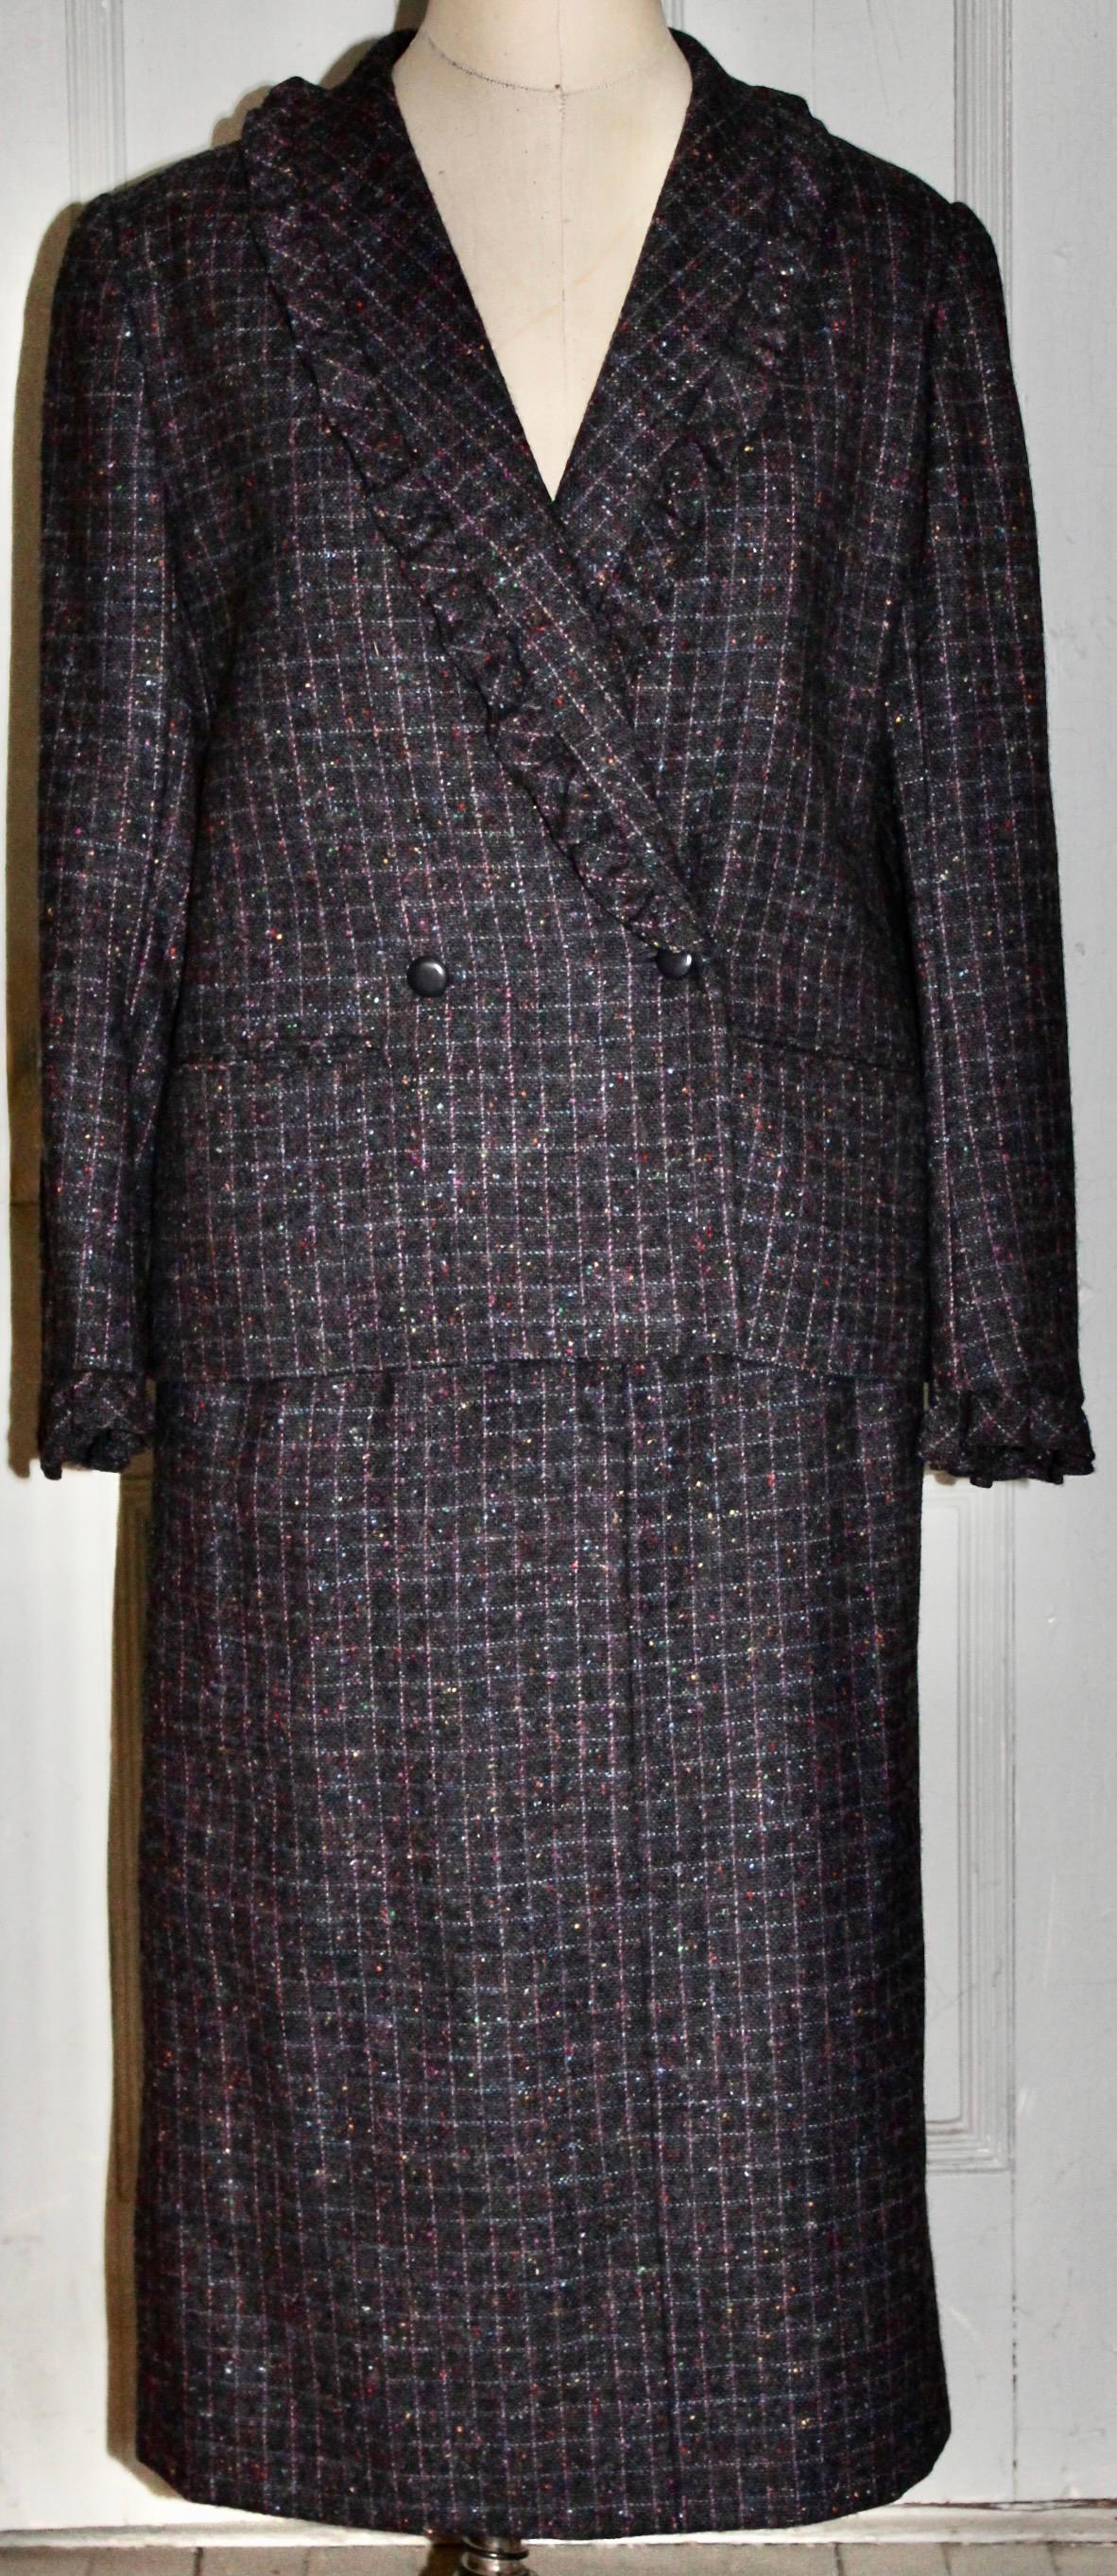 Nina Ricci purple wool tweed double breasted skirt suit, fabric imported from Ireland.
Ruffled edging on collar and sleeve cuffs. Nina Ricci Boutique Bloomingdales labels.
Jacket length 27